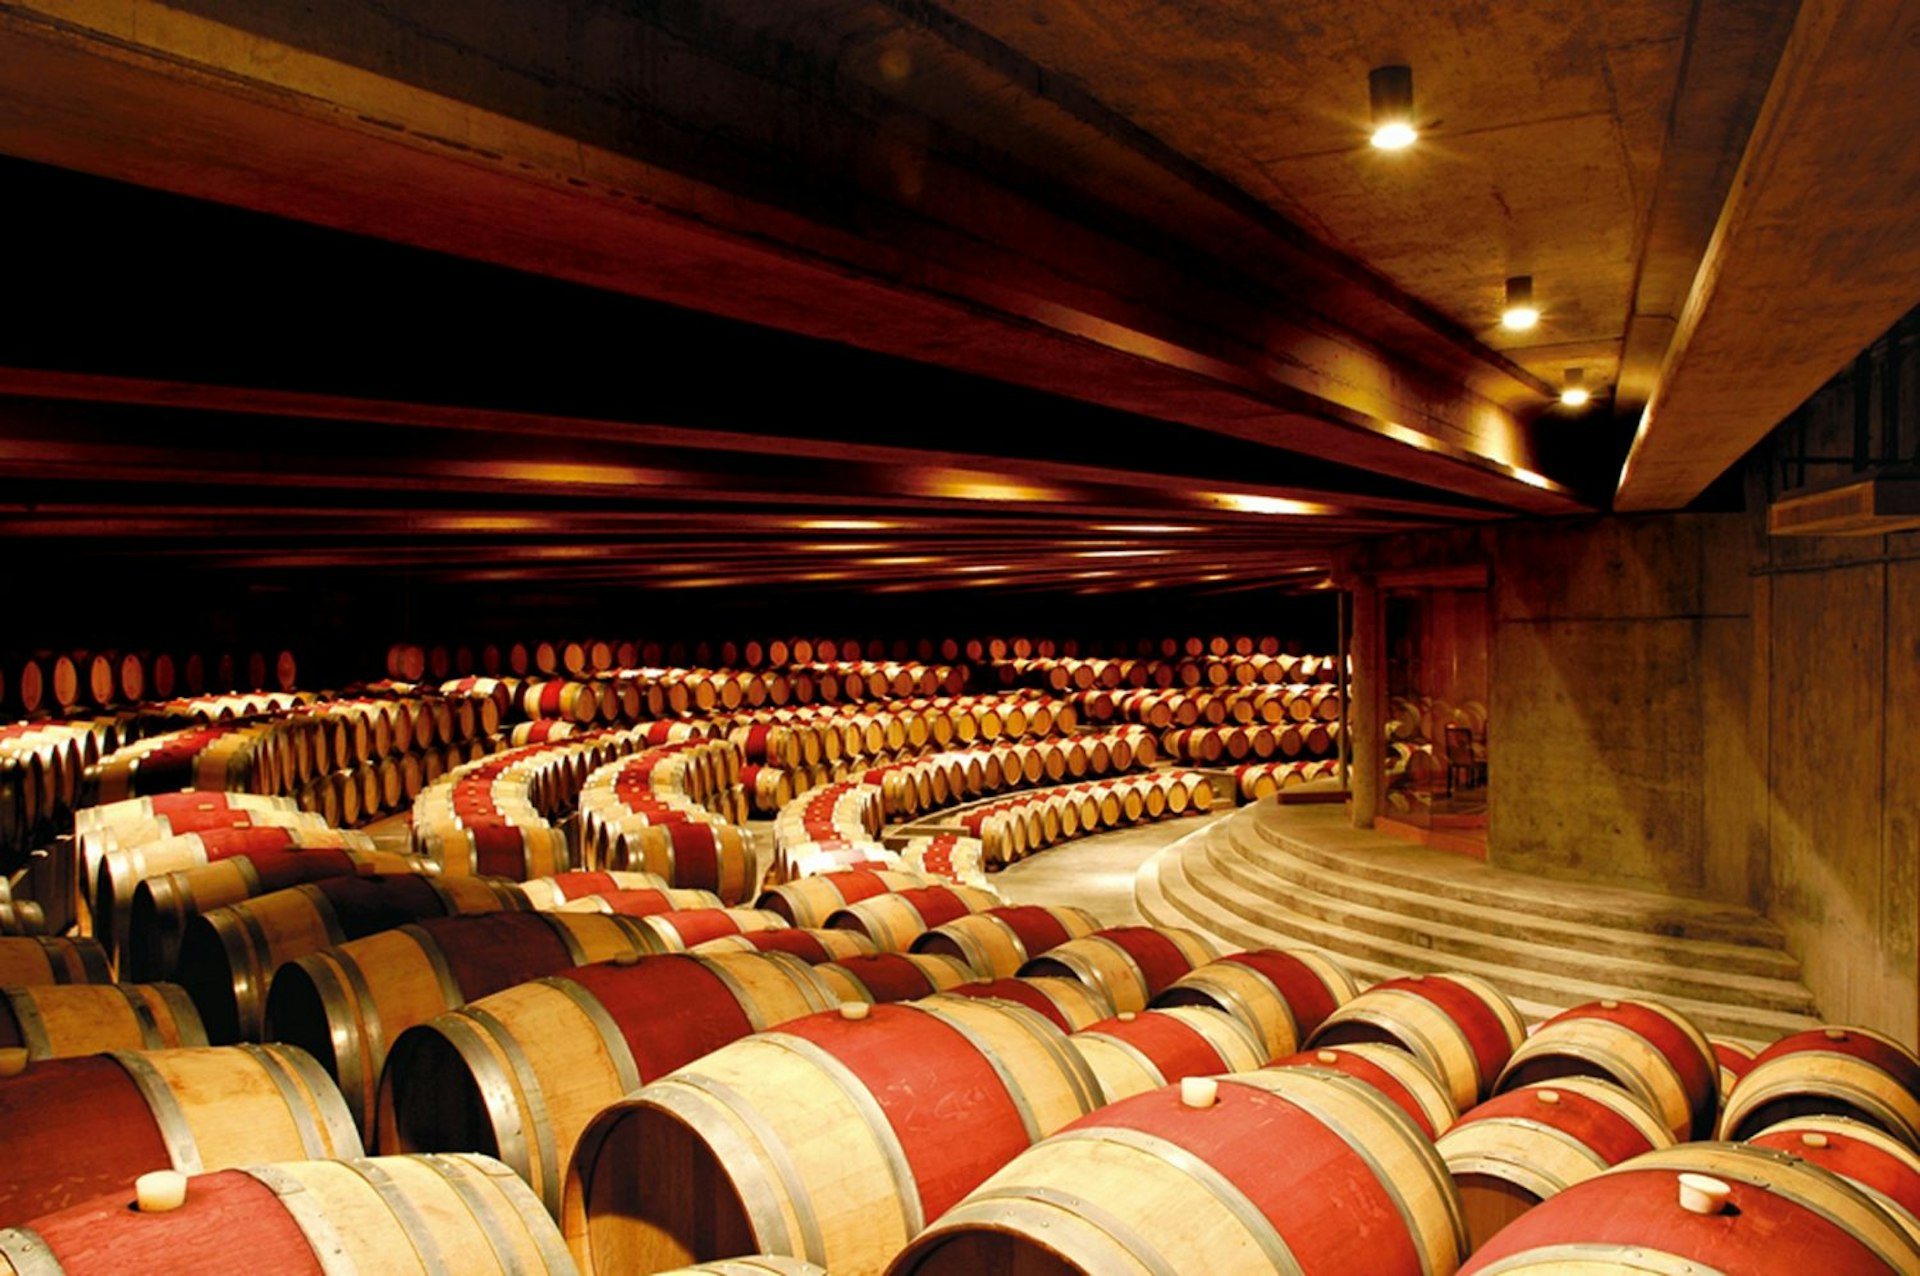 Wine barrels at Montes in Chile